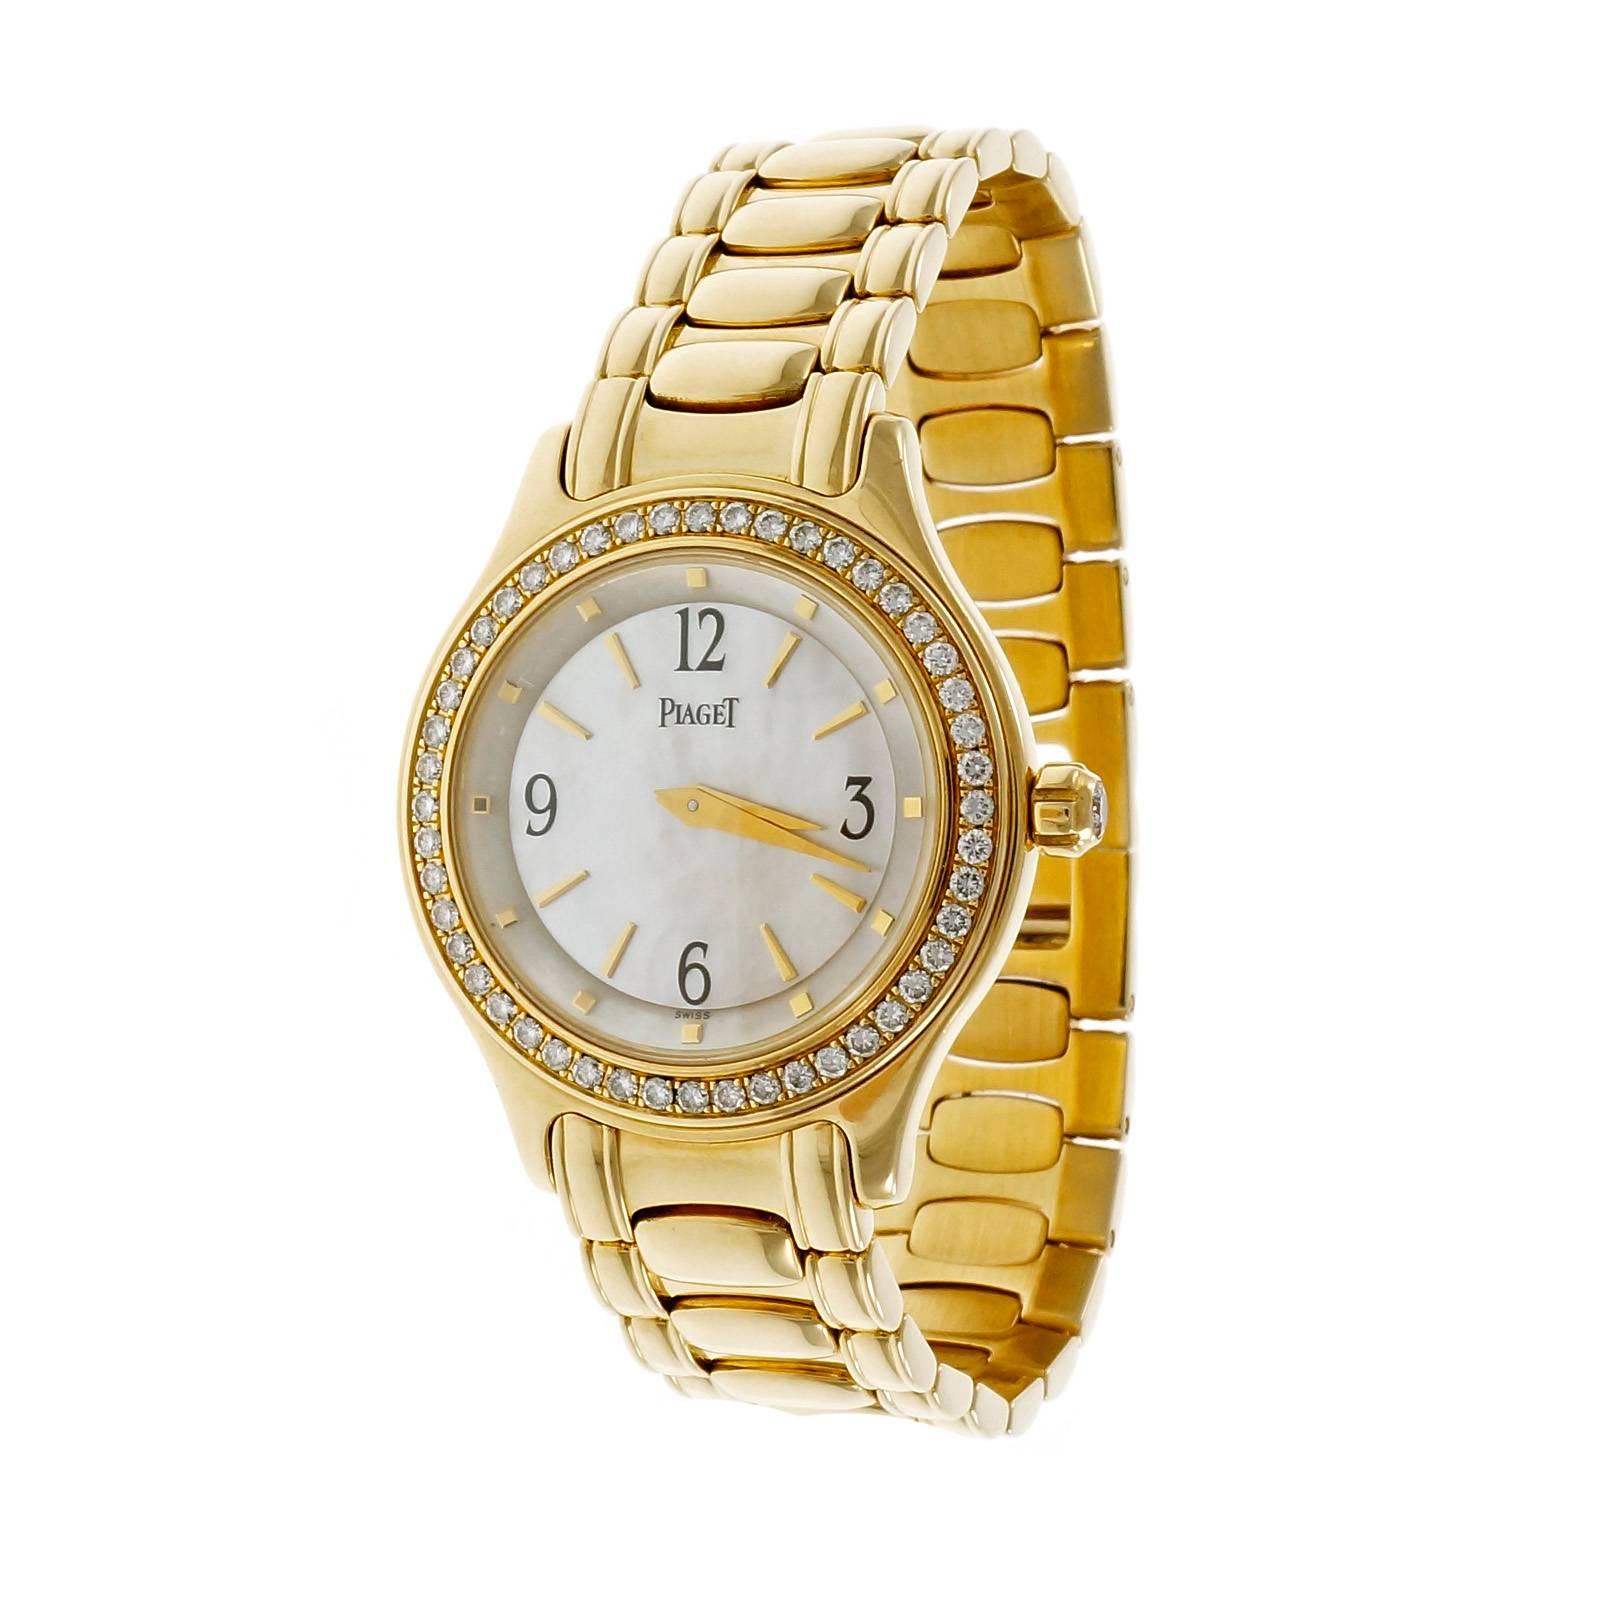 Piaget solid 18k yellow gold wristwatch diamond crown, dial and diamond bezel. All factory original. Circa 2000. Quartz movement.

18k yellow gold
Band length: 6.75 inches – can be shortened
82.8 grams
Length: 32.4mm
Width: 27.5mm
Band width